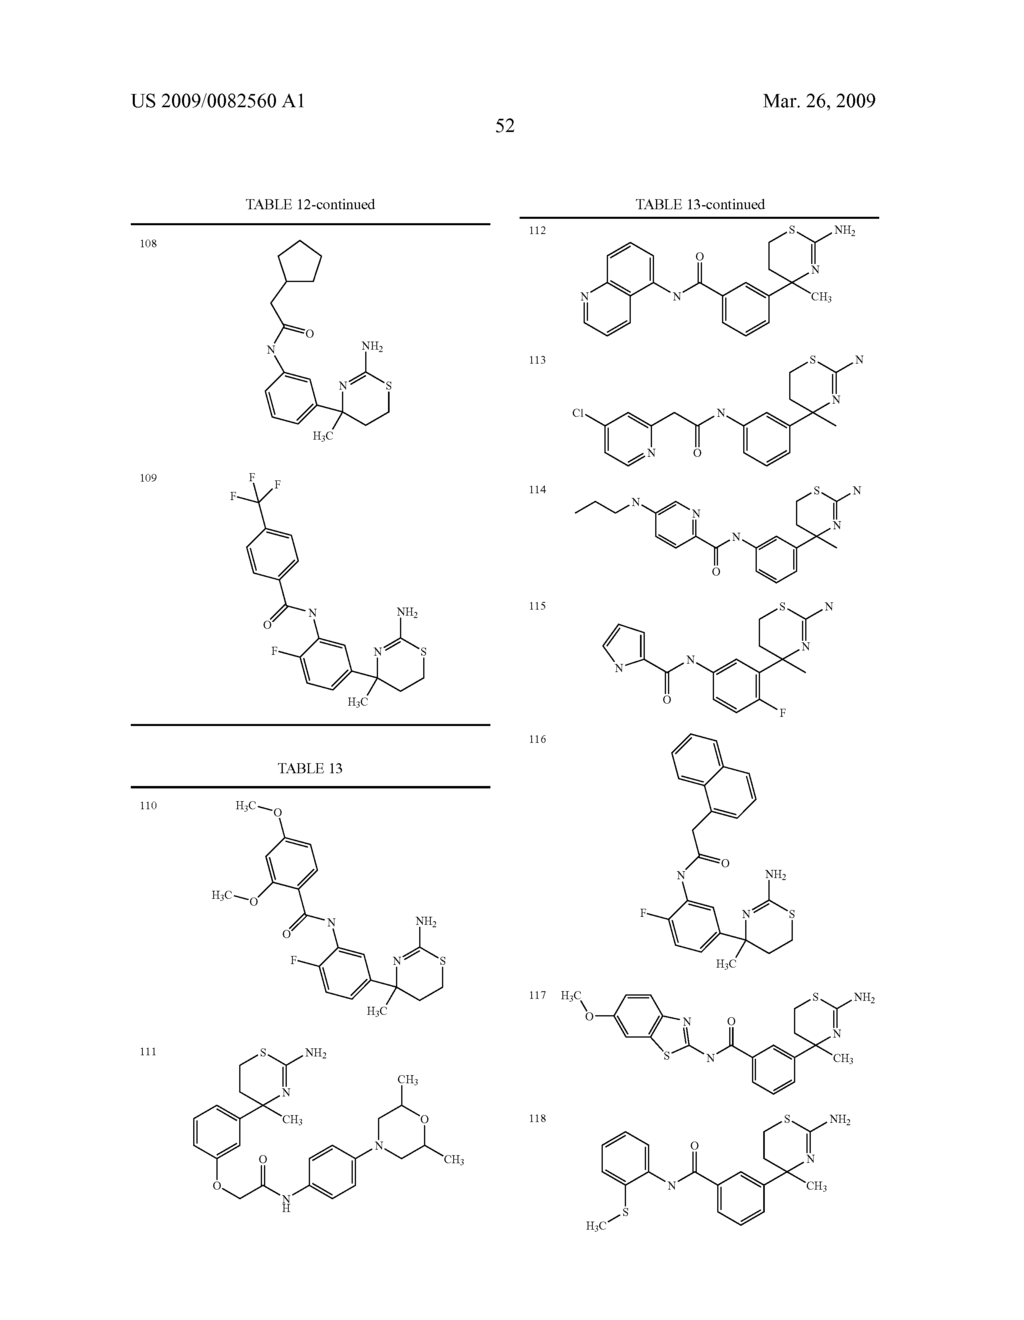 AMINODIHYDROTHIAZINE DERIVATIVES - diagram, schematic, and image 53